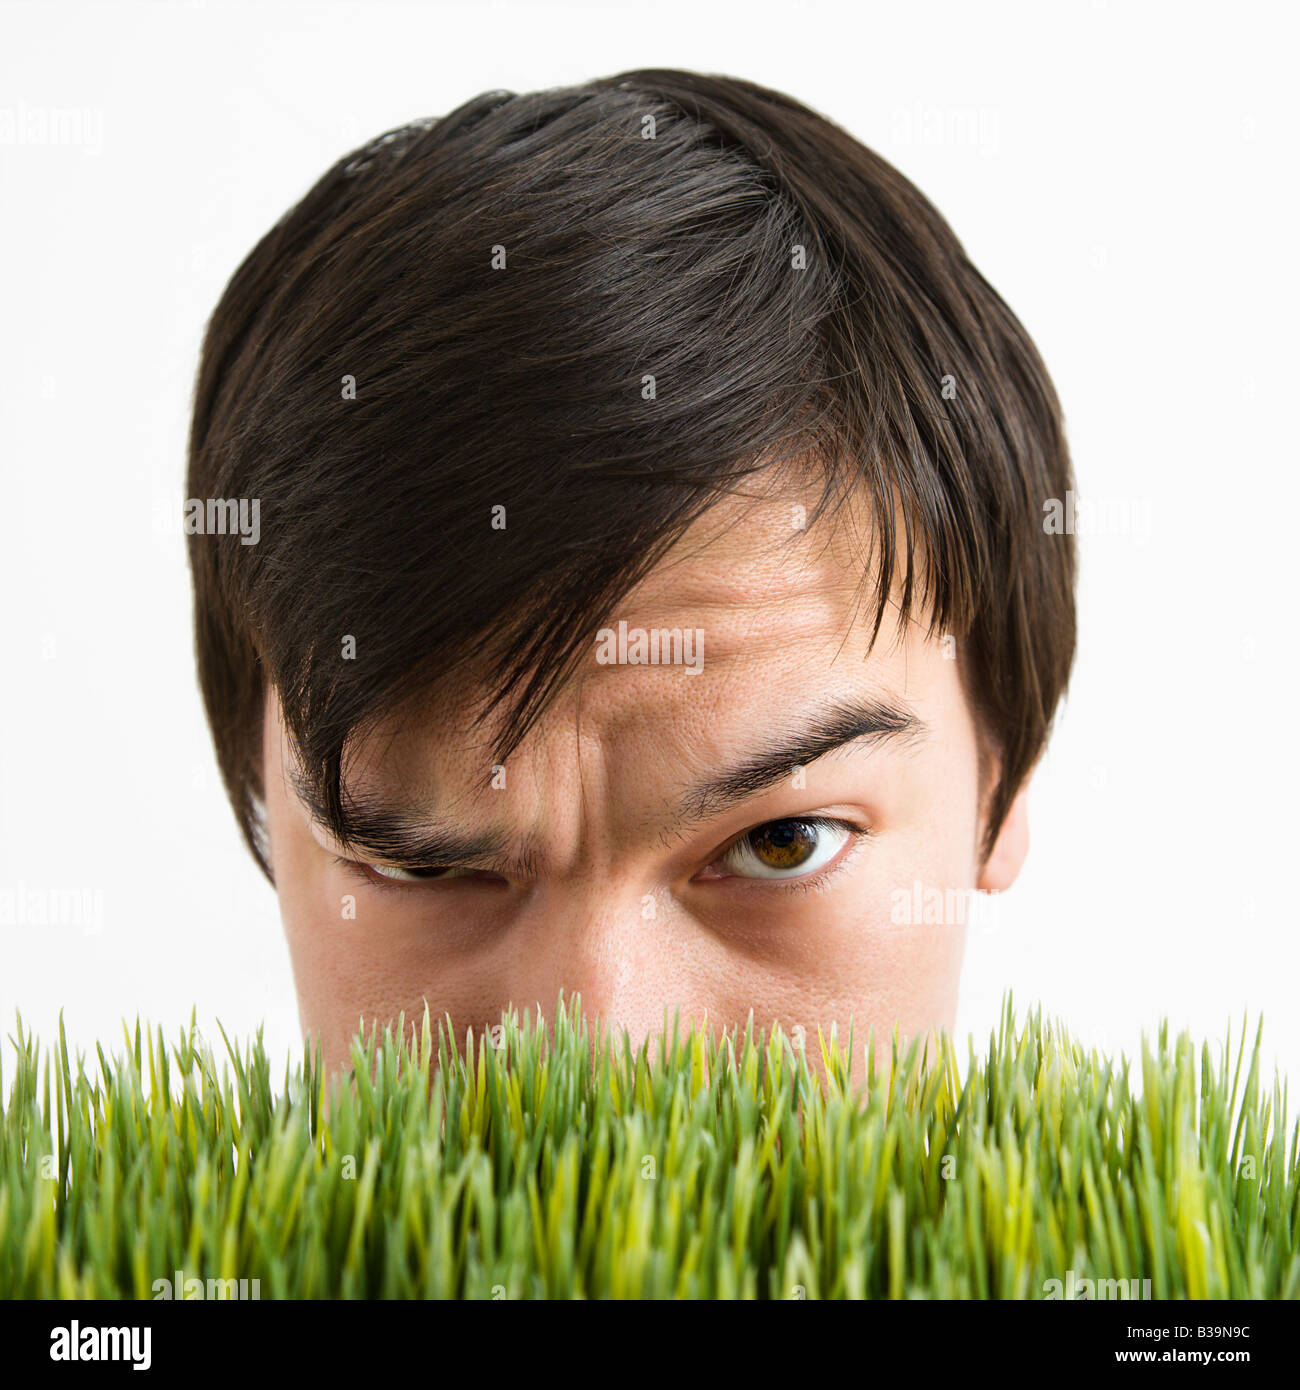 Asian young man looking over grass with eyebrow cocked Stock Photo